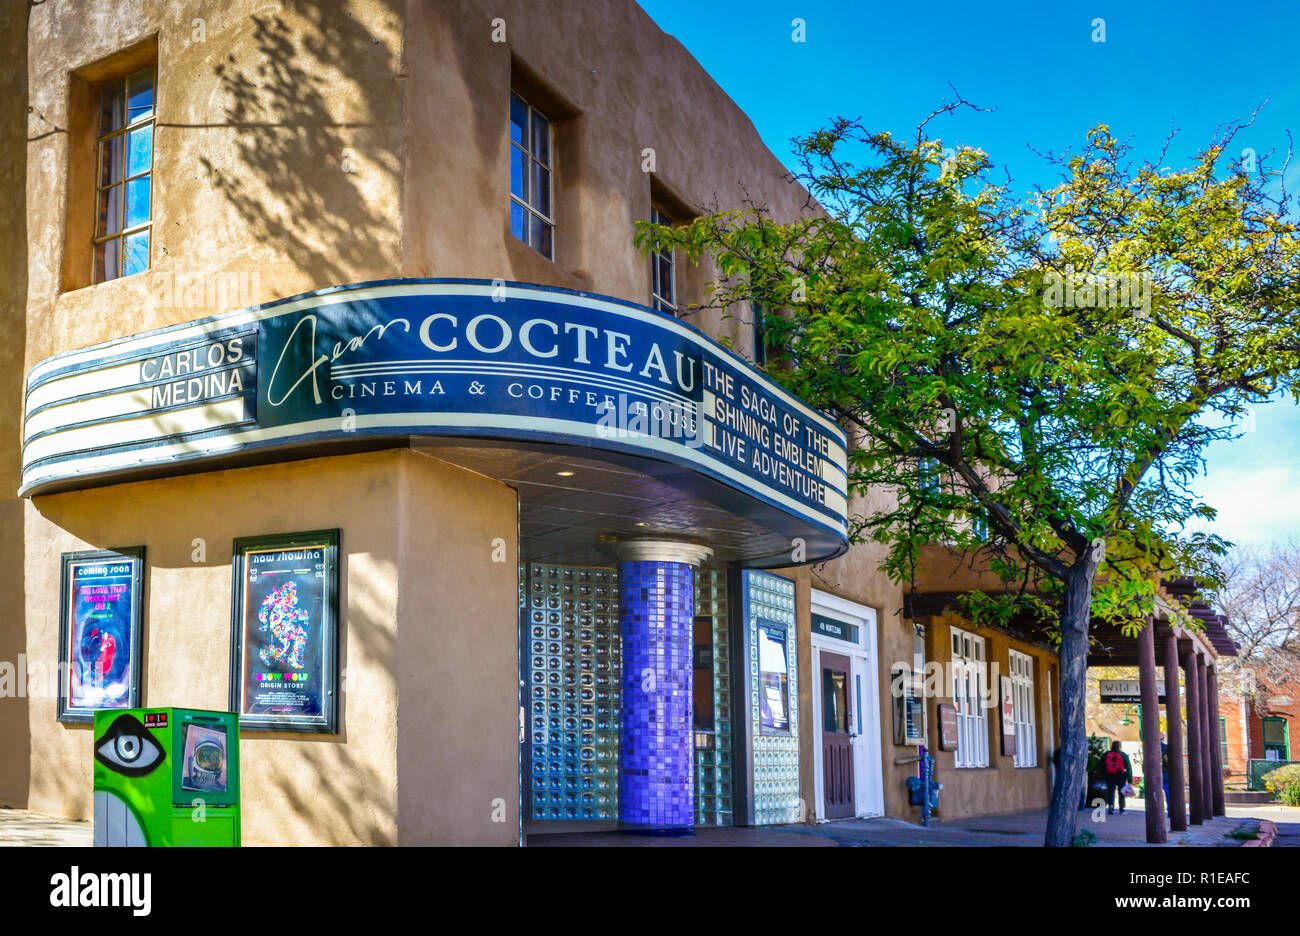 The Jean Cocteau Cinema is a historic movie theater located in the Railyard  arts district of Santa Fe, NM, and owned by author George R. R. Martin  Stock Photo - Alamy